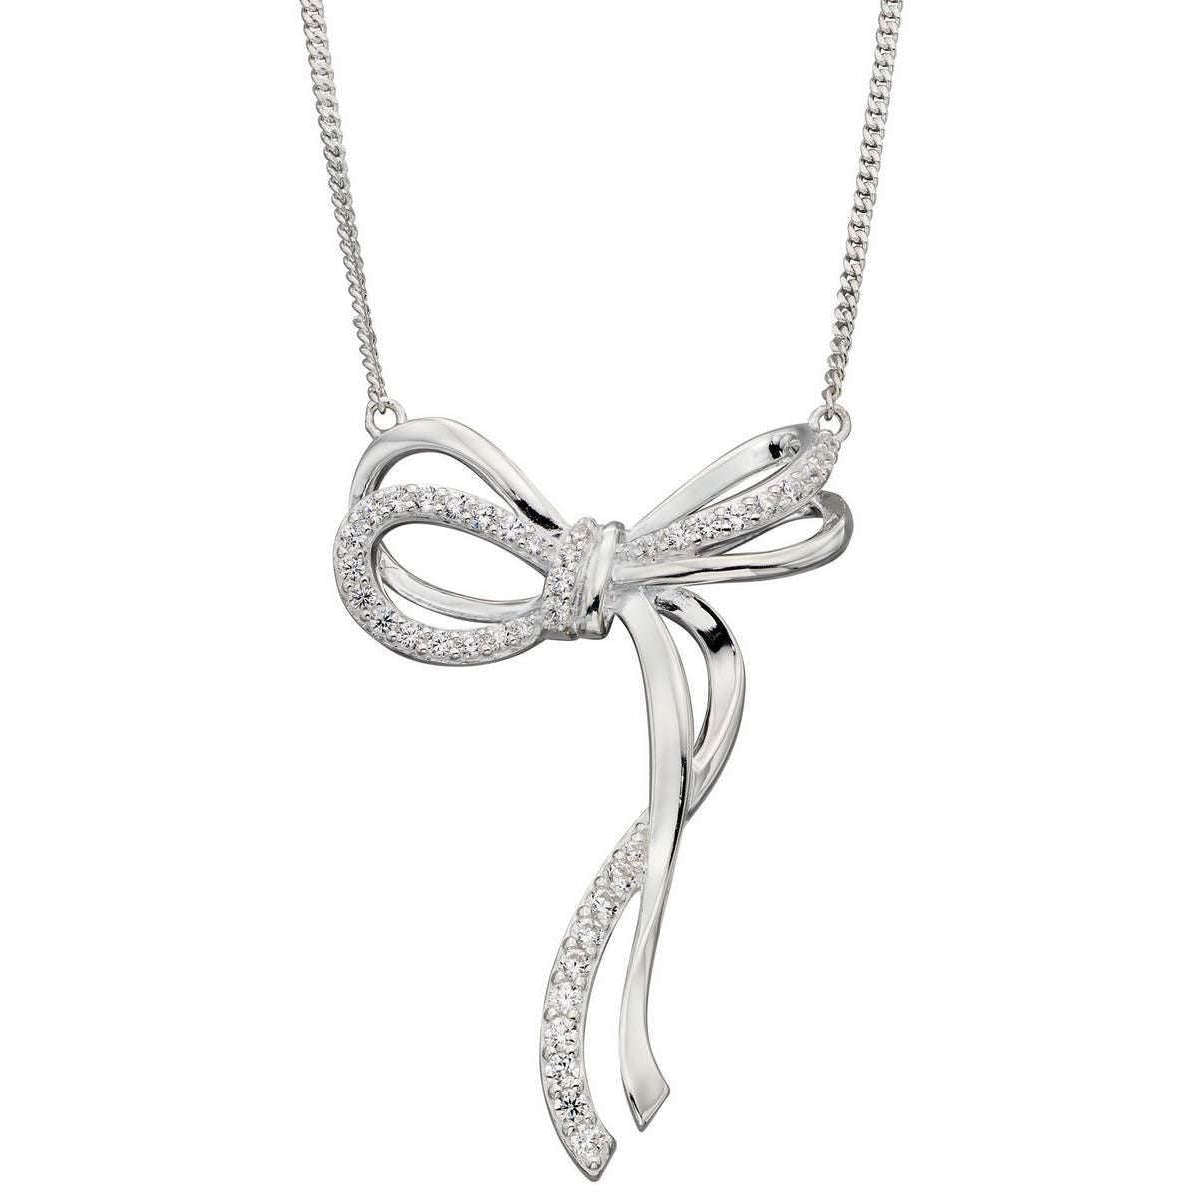 Elements Silver Pave Bow Necklace - Silver